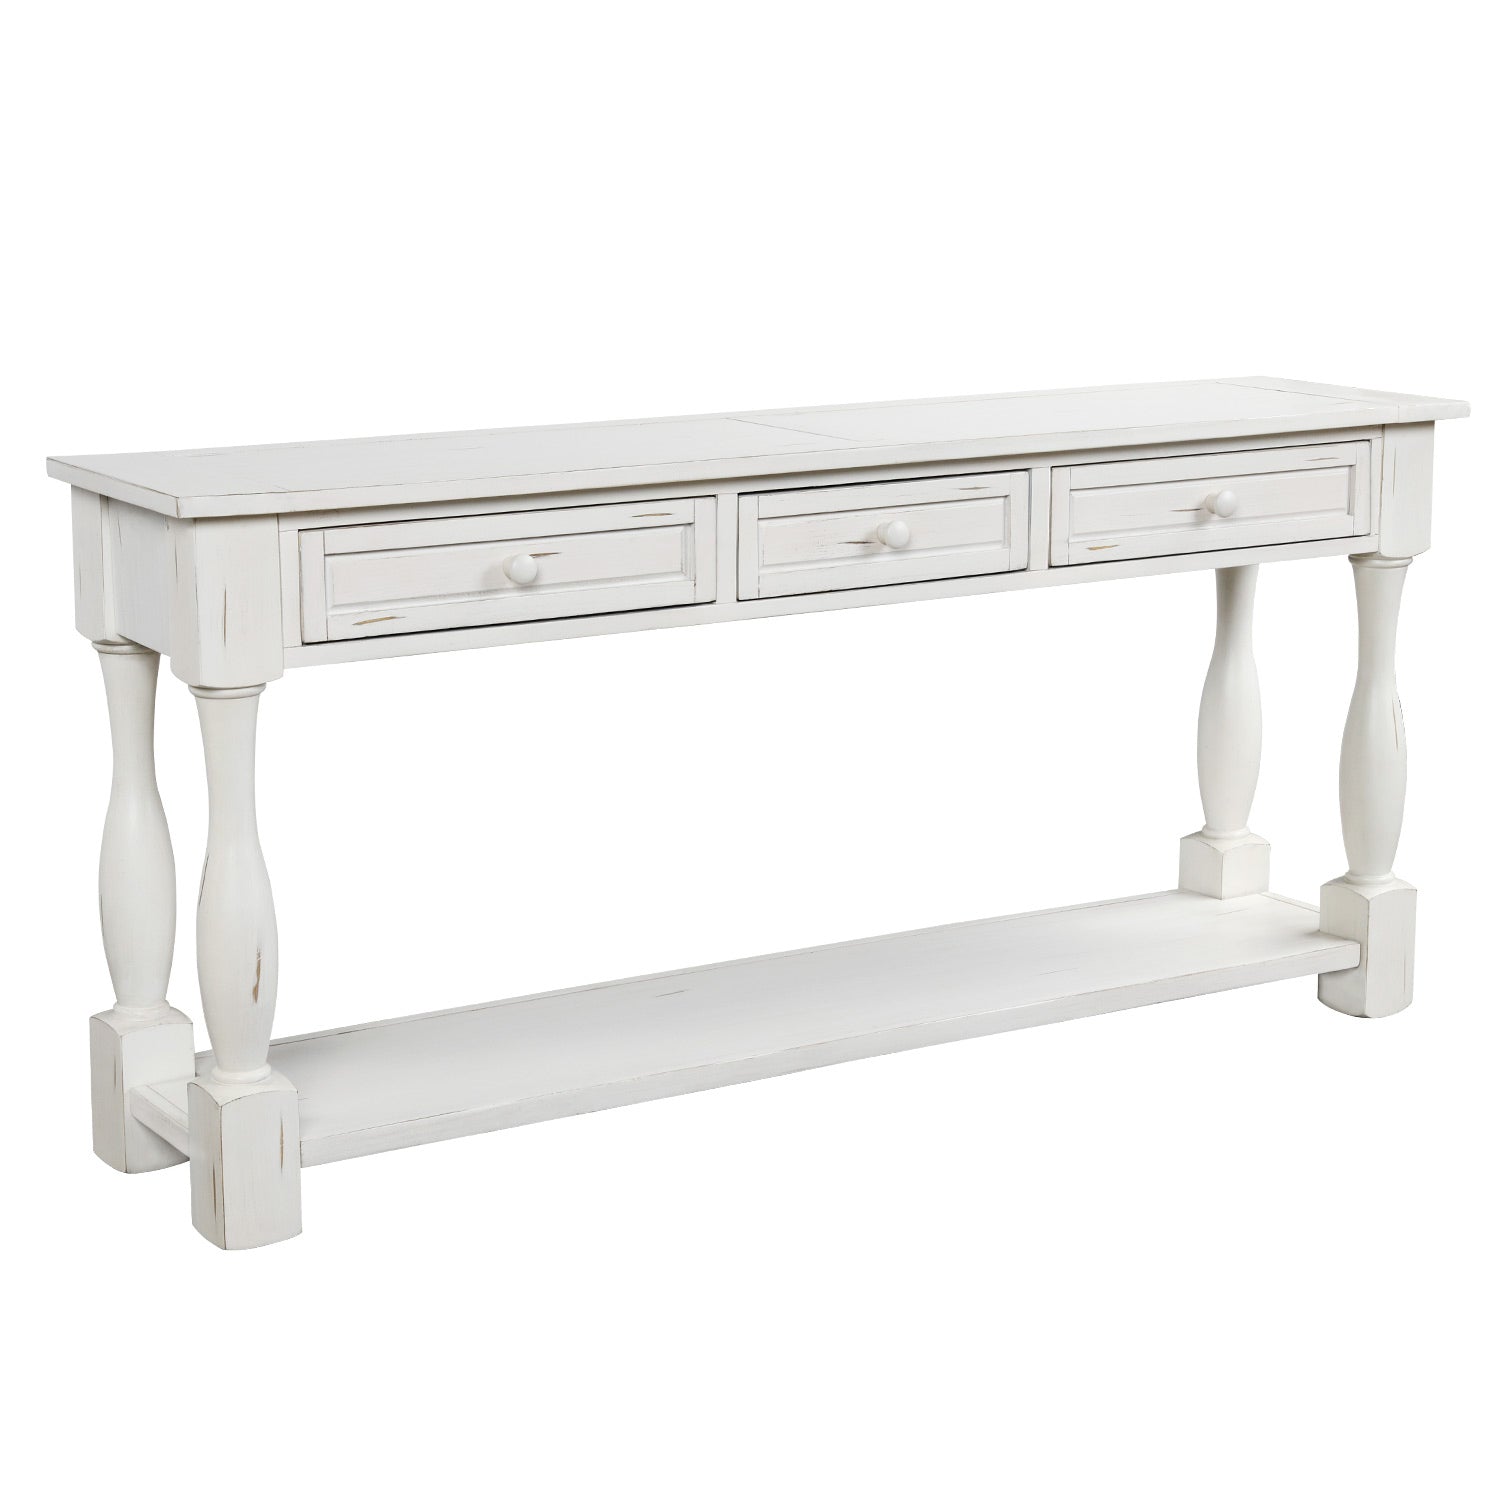 64" Console Table With storage and Shelf, Antique white color